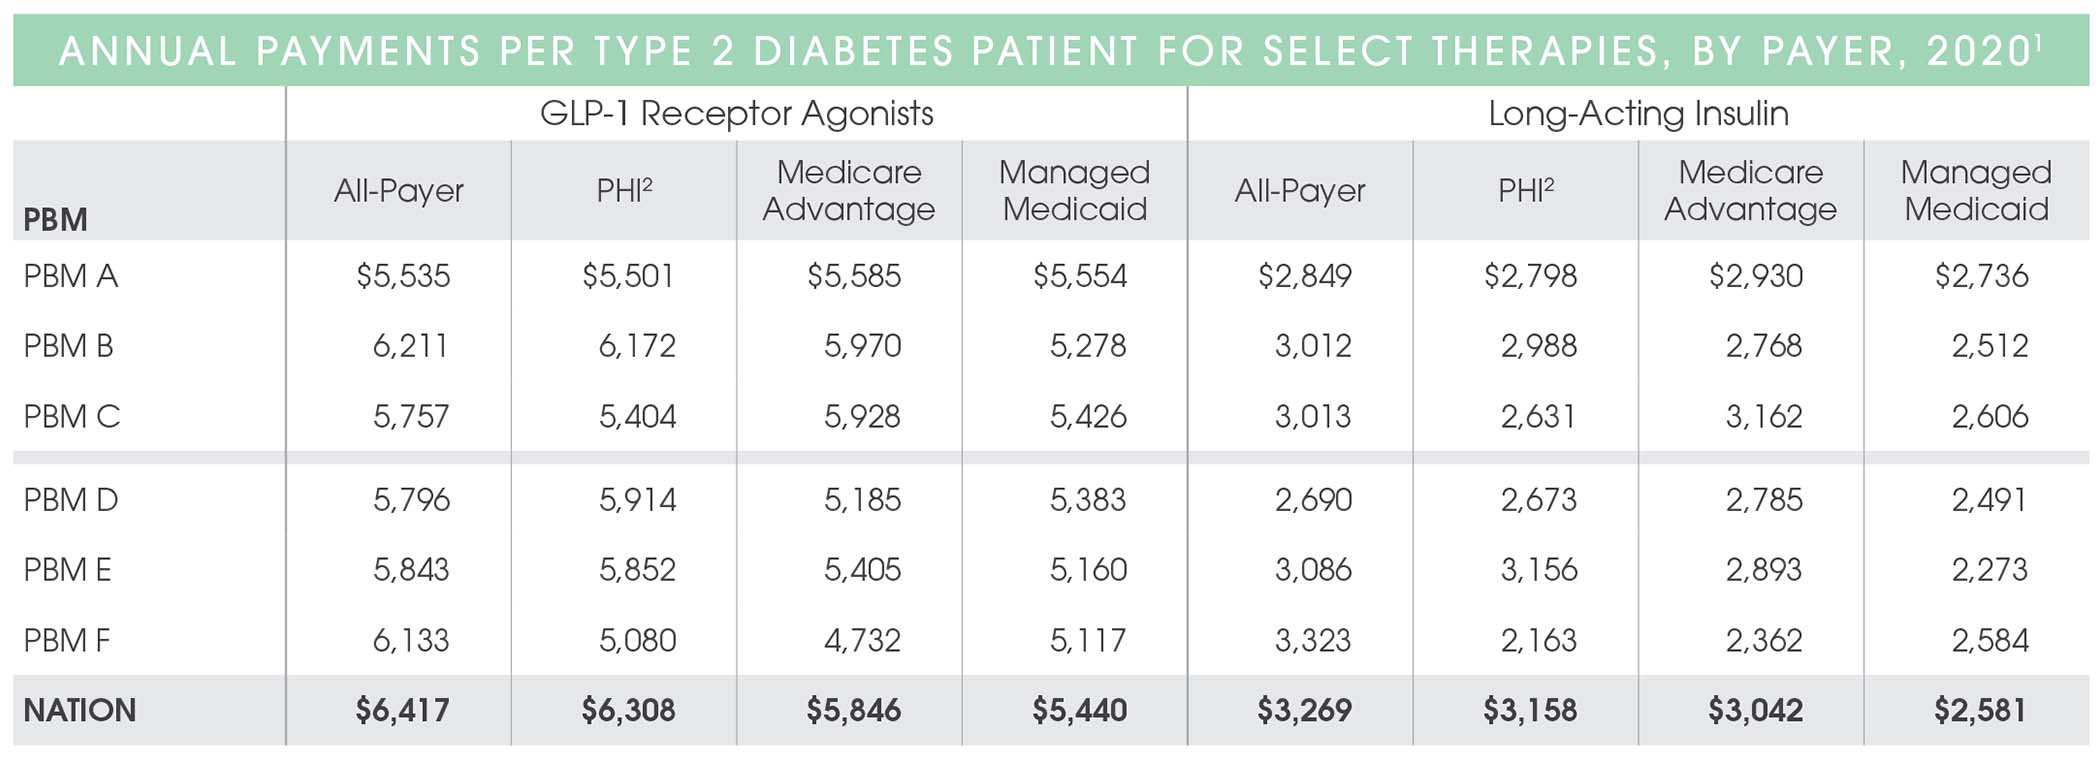 ANNUAL PAYMENTS PER TYPE 2 DIABETES PATIENT FOR SELECT THERAPIES, BY PAYER, 2020